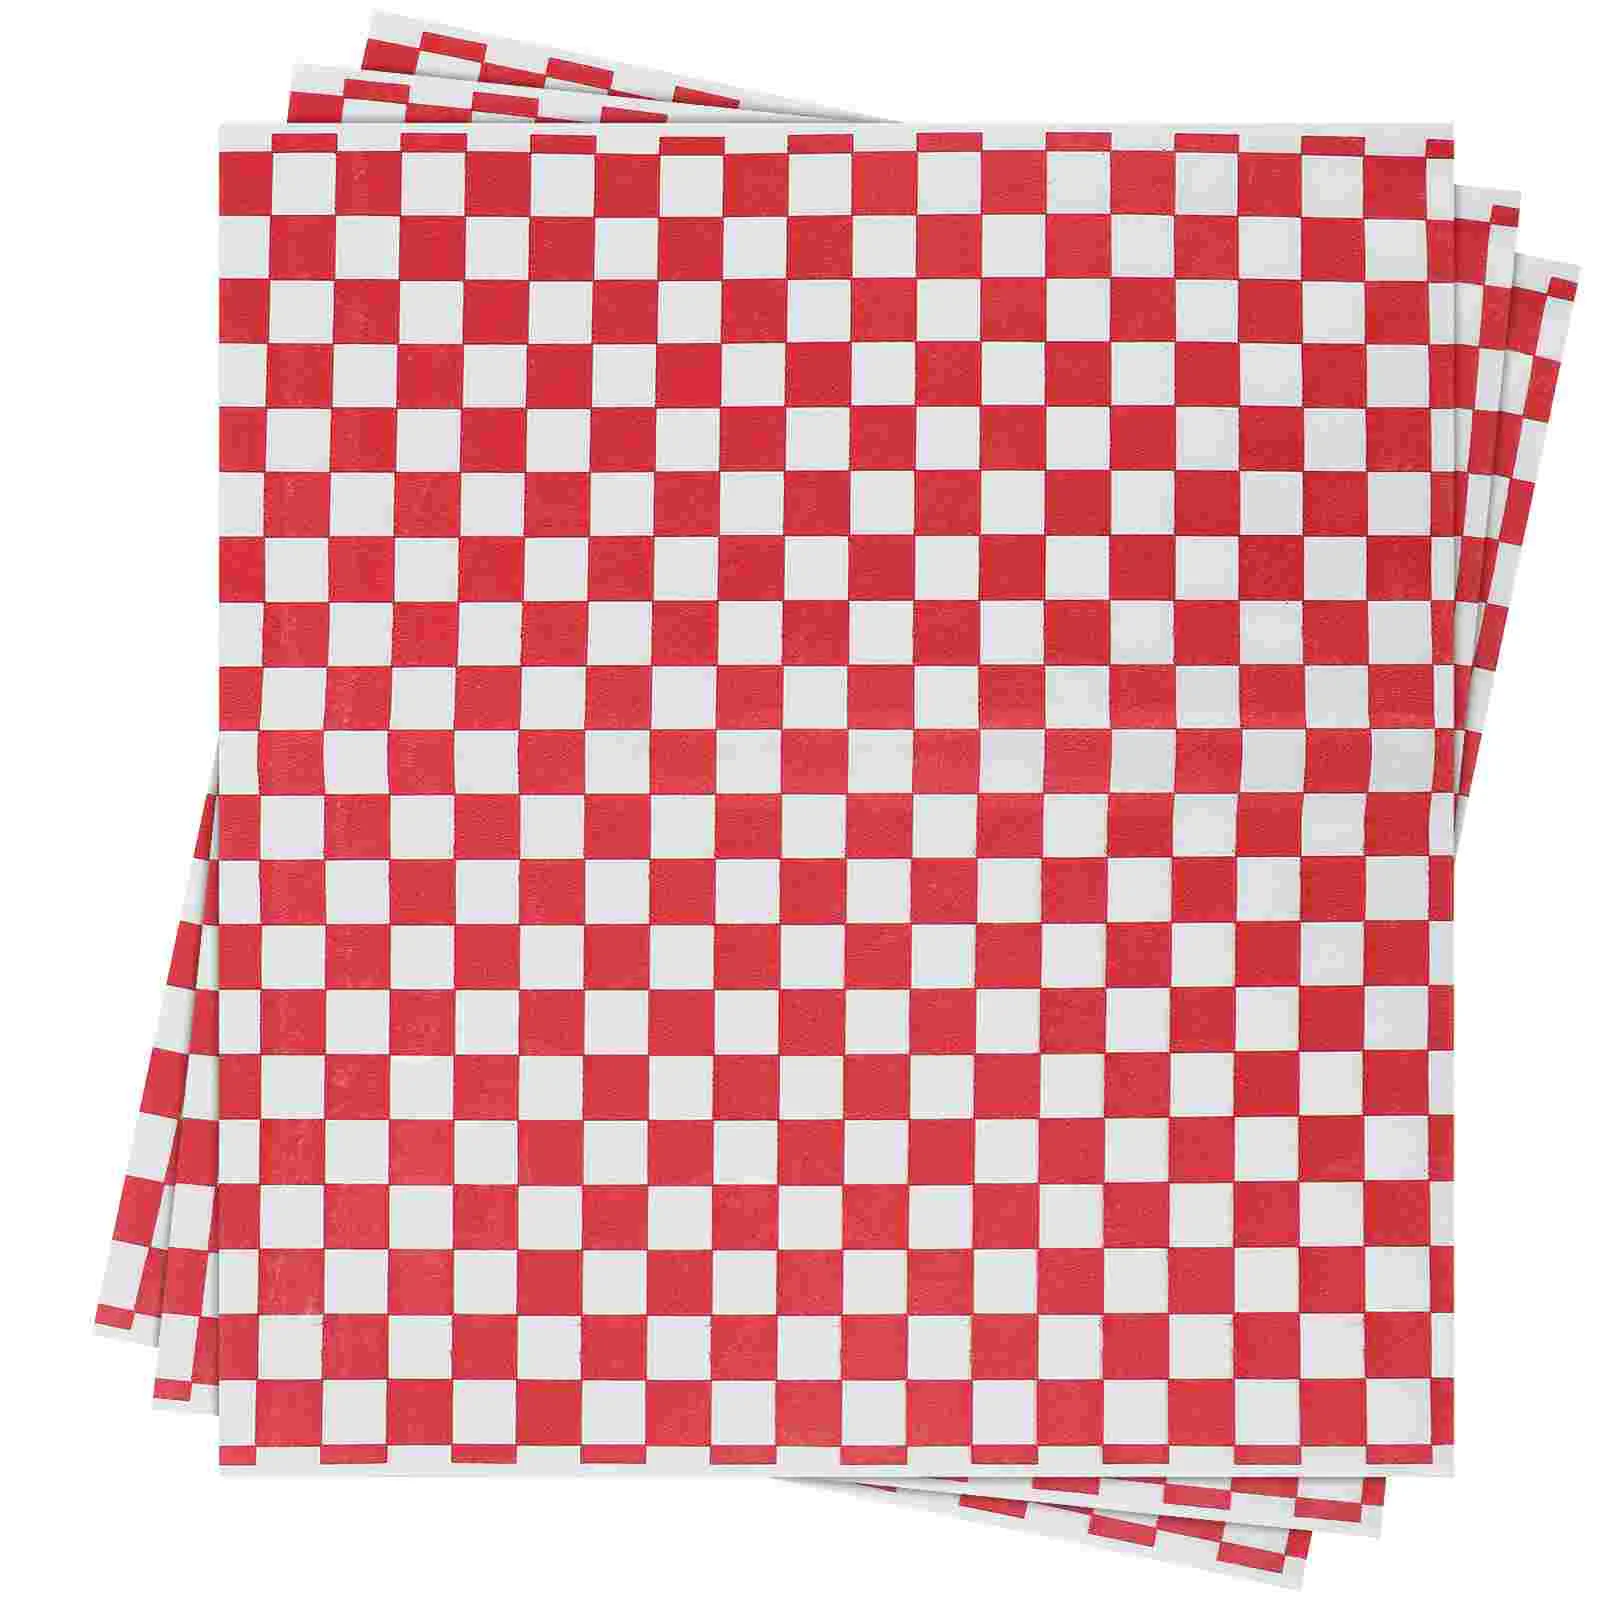 

Paper Sandwich Wrapping Checkered Square Grease Resistant Red Truck Supplies Deli Sheets Wraps Burger Caramel Wrappers